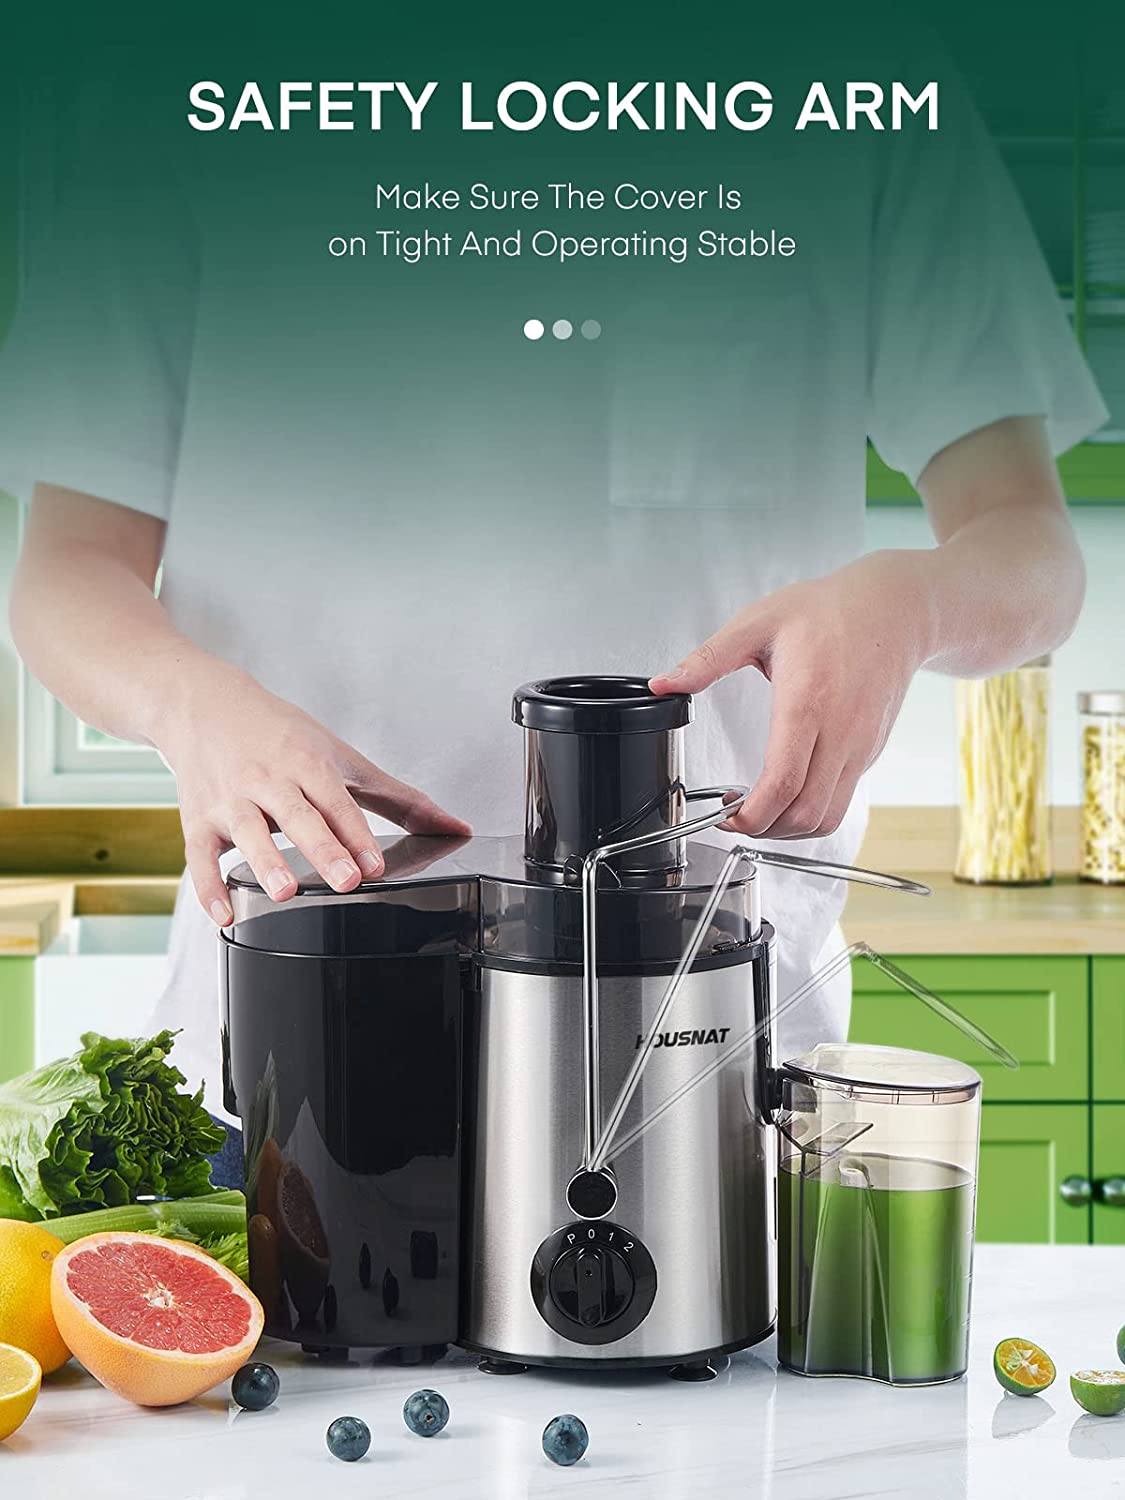 safety locking arm, Juicer, HOUSNAT Juicer Machines Vegetable and Fruit with 3-Speed Setting, Upgraded Version 400W Motor Quick Juicing, Juicing Recipe Included